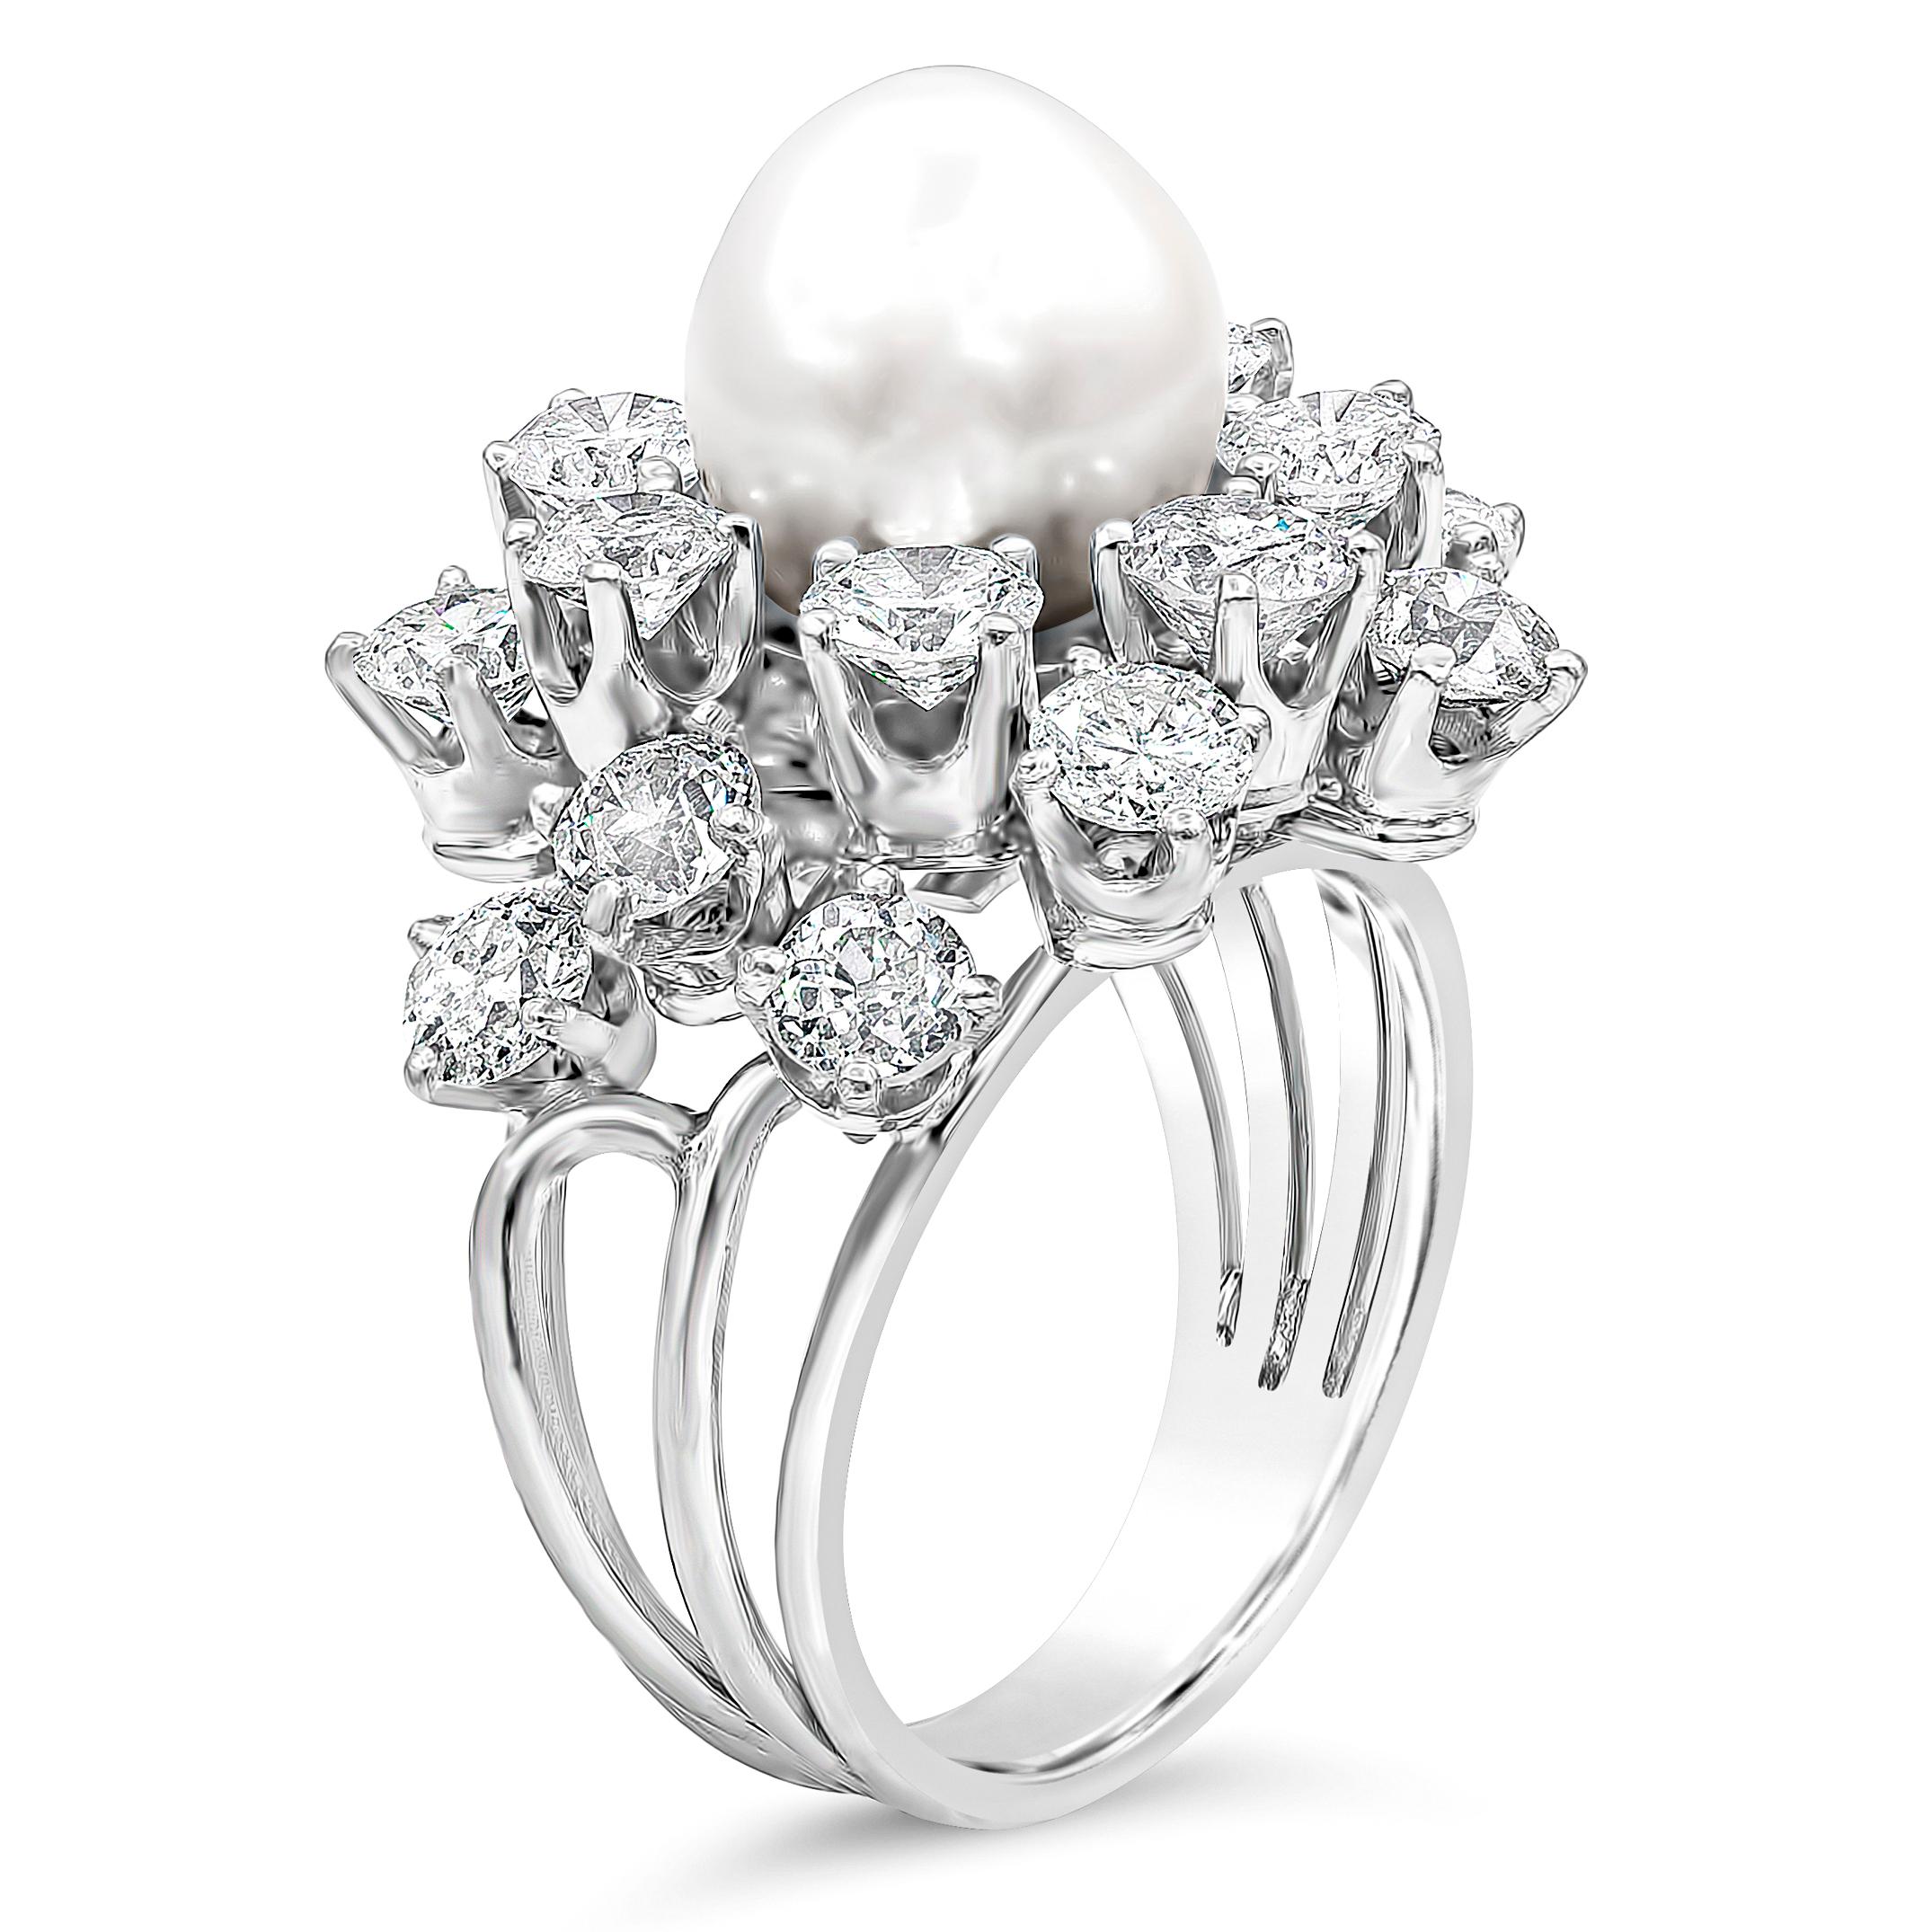 A beautiful cocktail ring showcasing a 10 carat pearl, accented with 17 brilliant round diamonds halo. Set in polished platinum setting. Diamonds weigh 4.25 carats total. Size 7 US.

